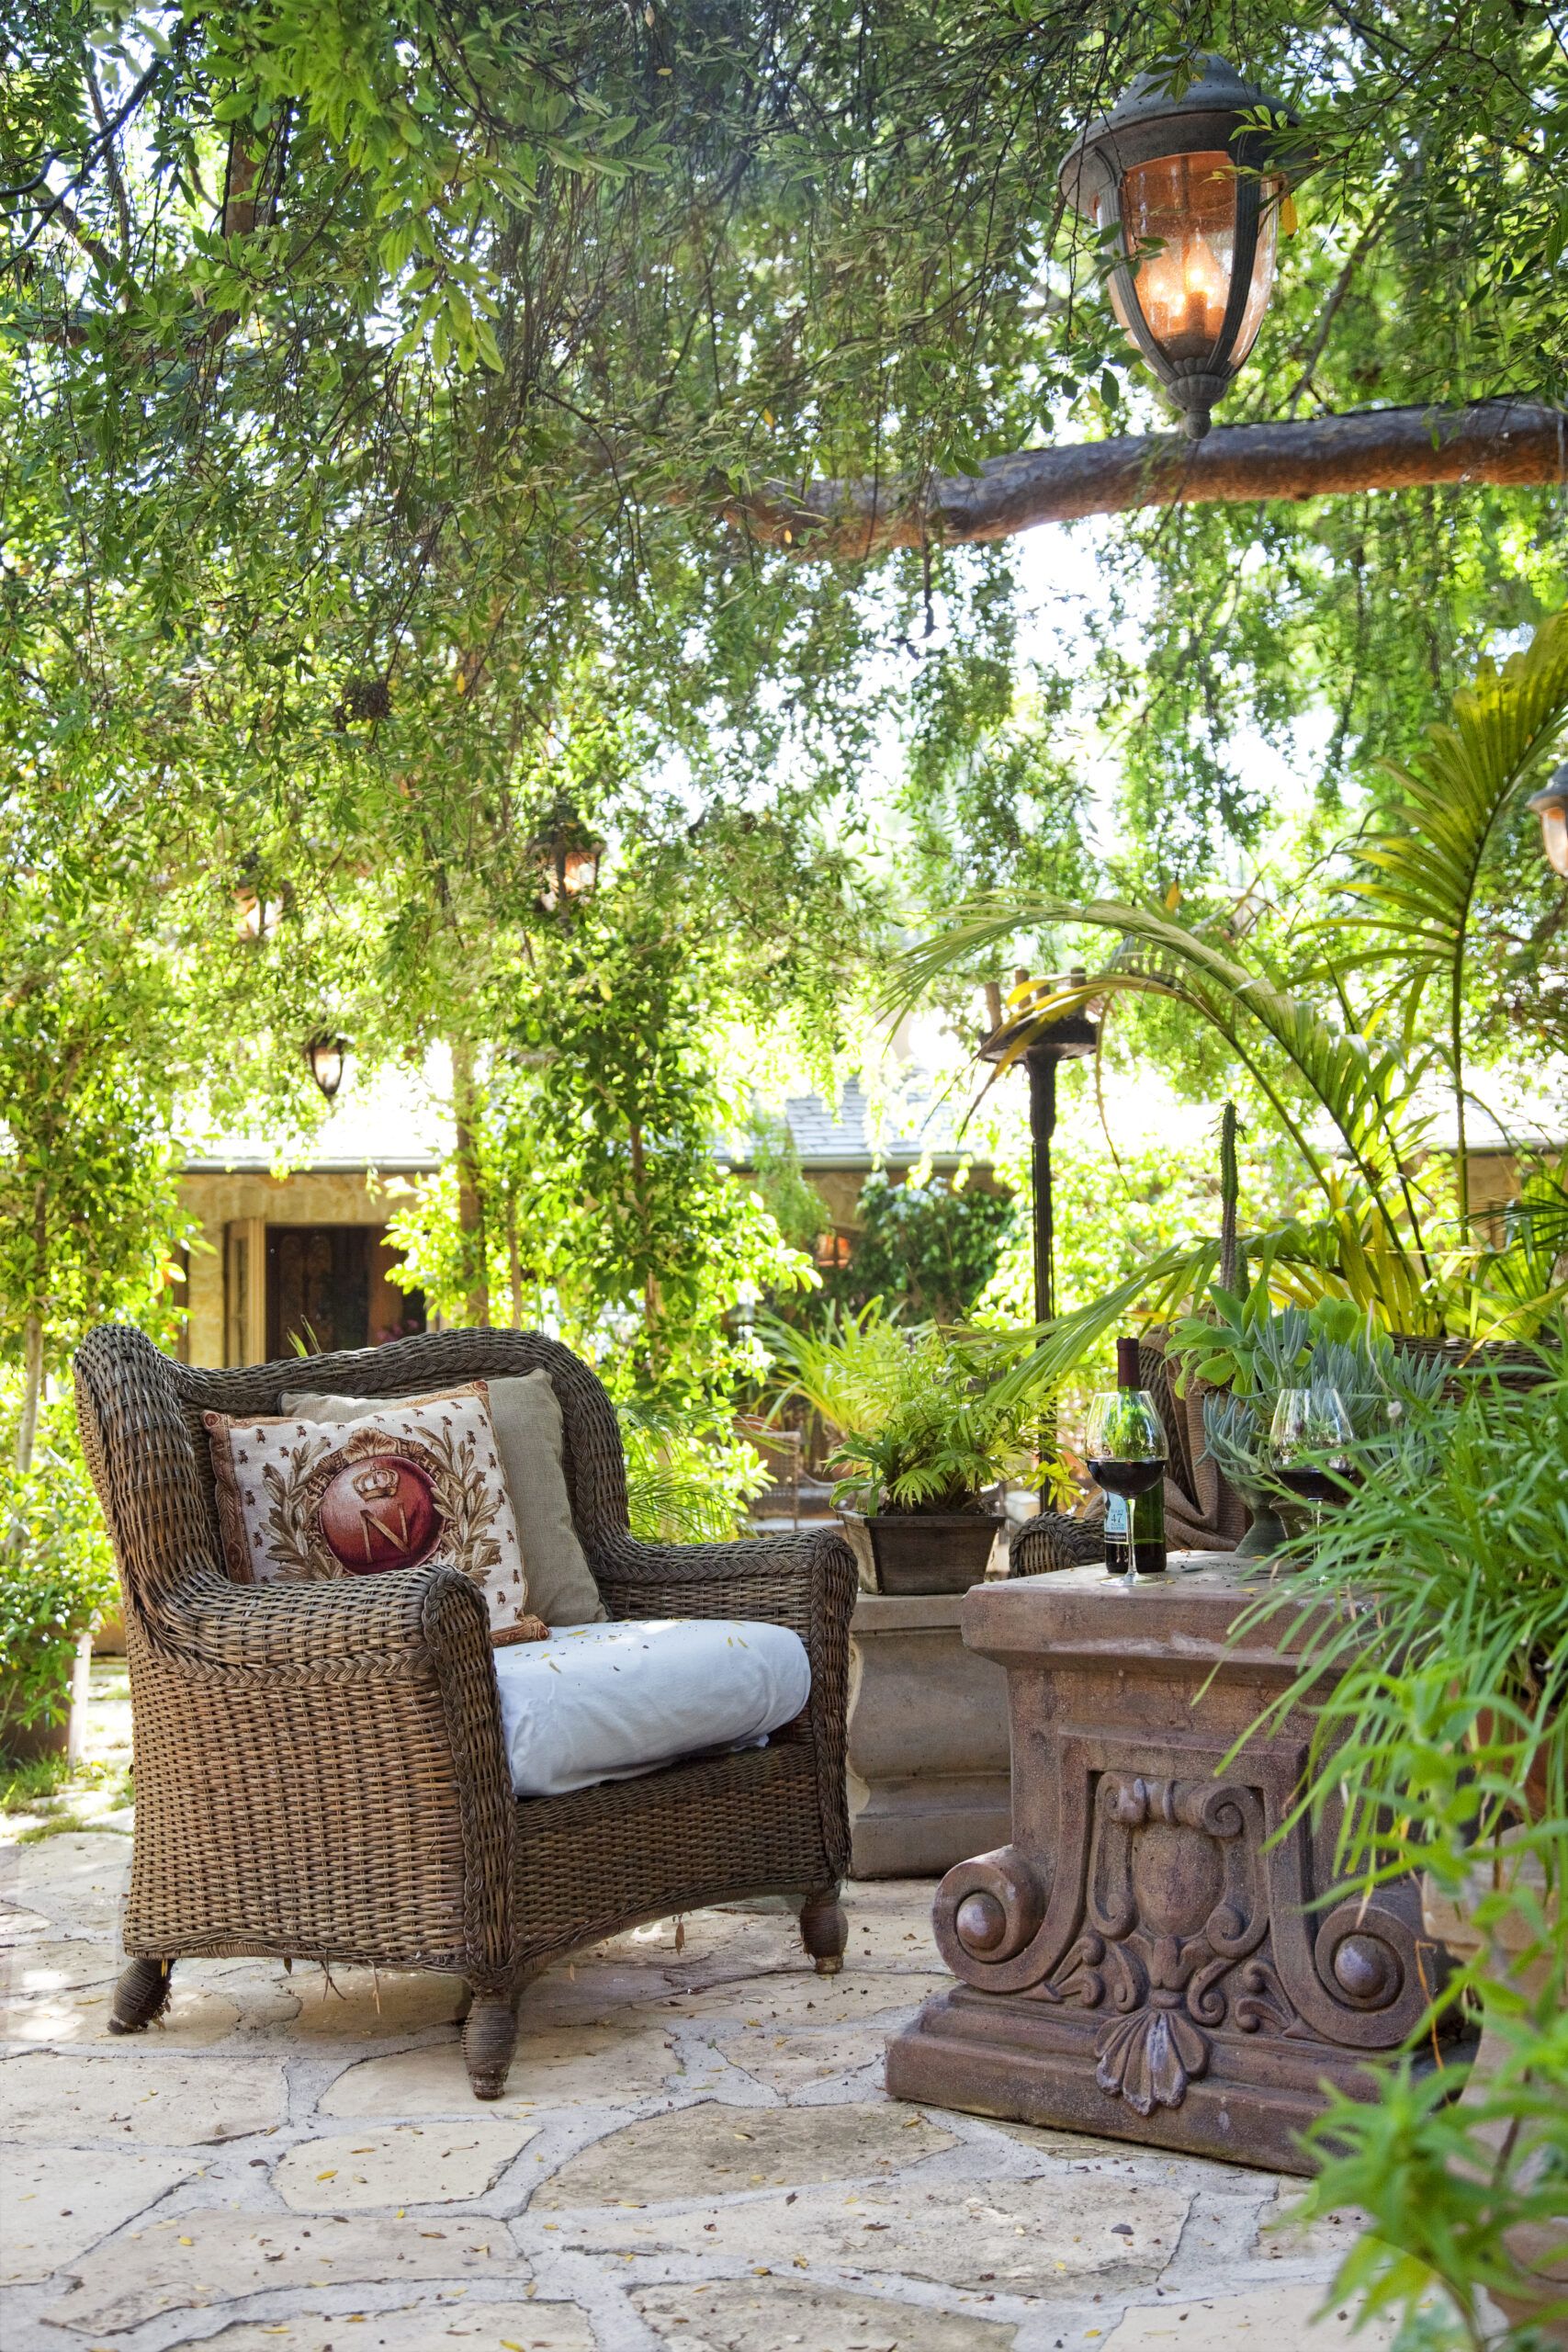 18 tips for decorating your garden - this old house